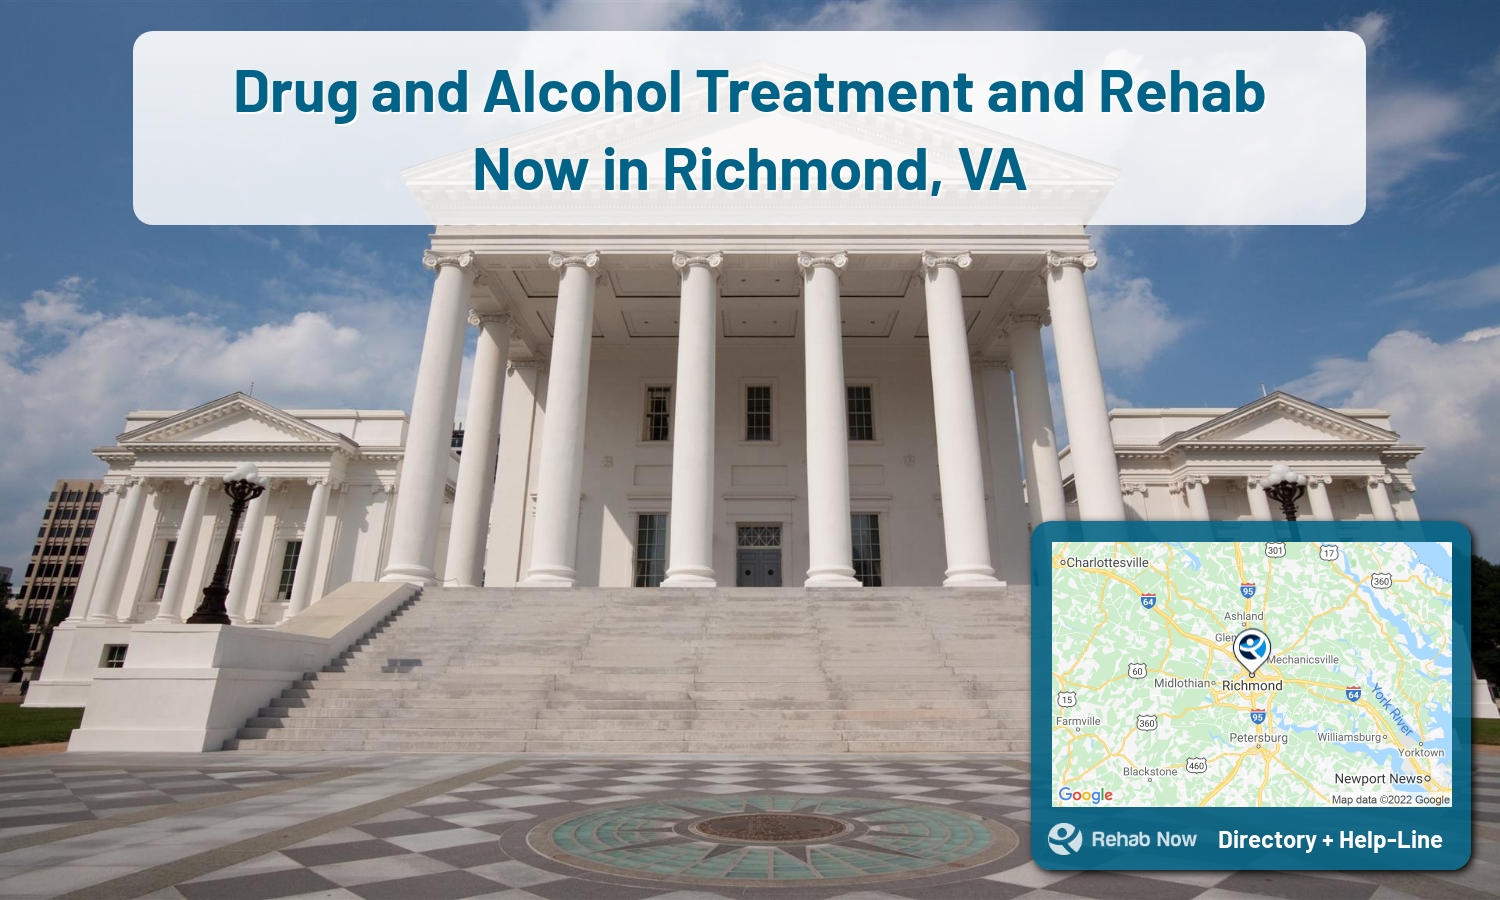 Richmond, VA Treatment Centers. Find drug rehab in Richmond, Virginia, or detox and treatment programs. Get the right help now!